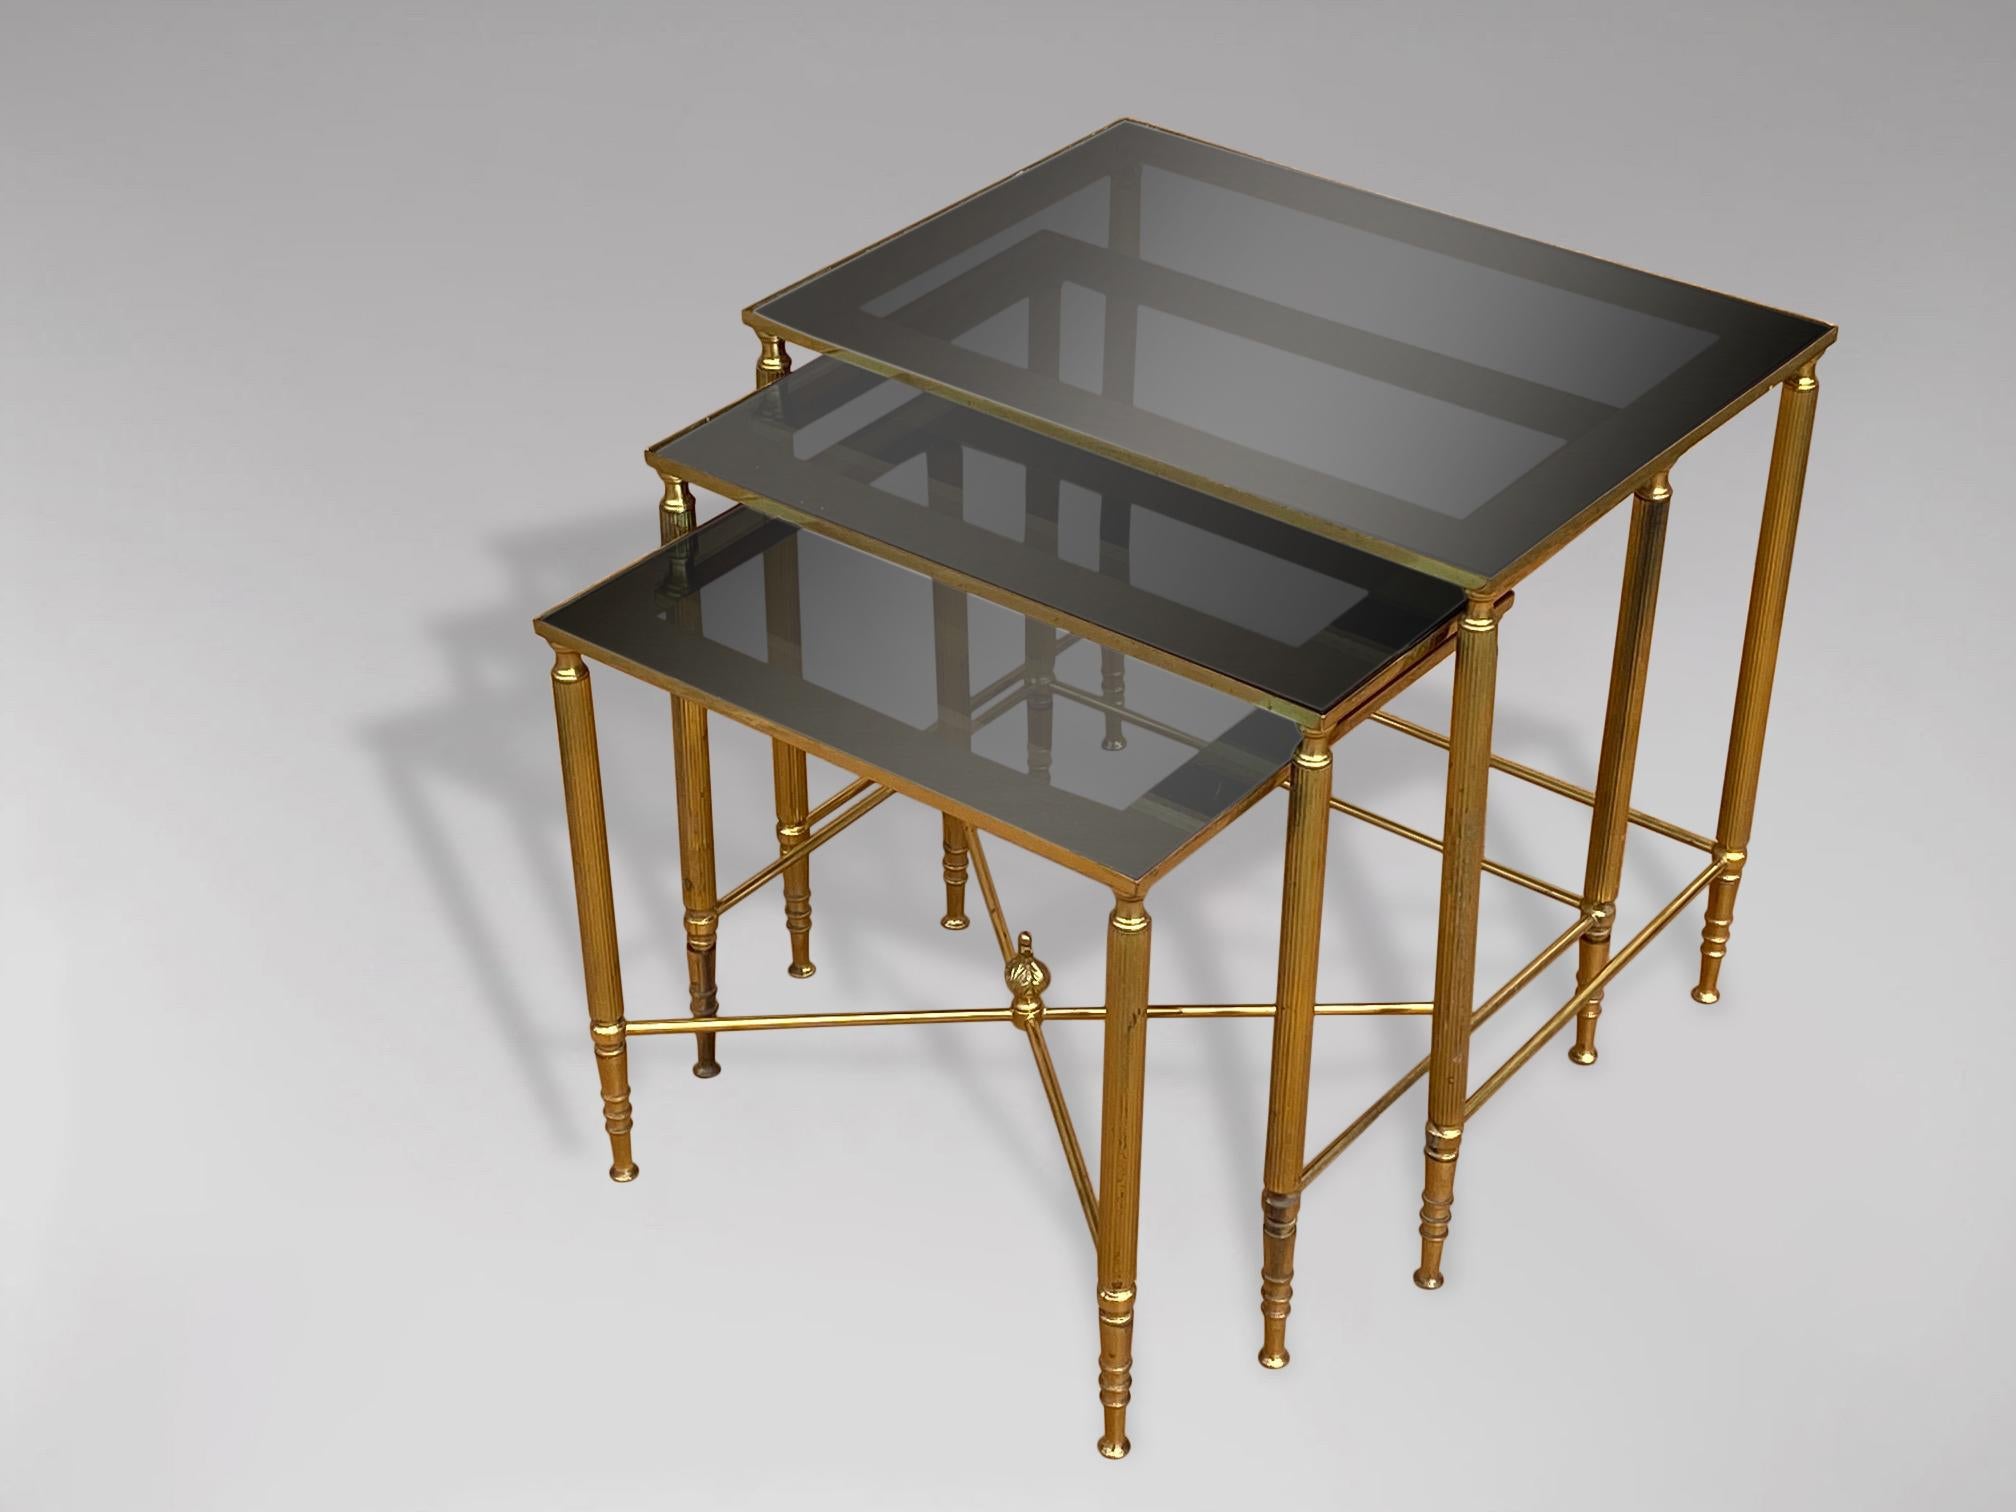 A stunning set of 3 mid 20th century rectangular brass frame nest of tables with inset smoked glass and mirror frame tops. In very good vintage condition. These tables were made in France and date from around the 1960s. 

Dimensions of the large